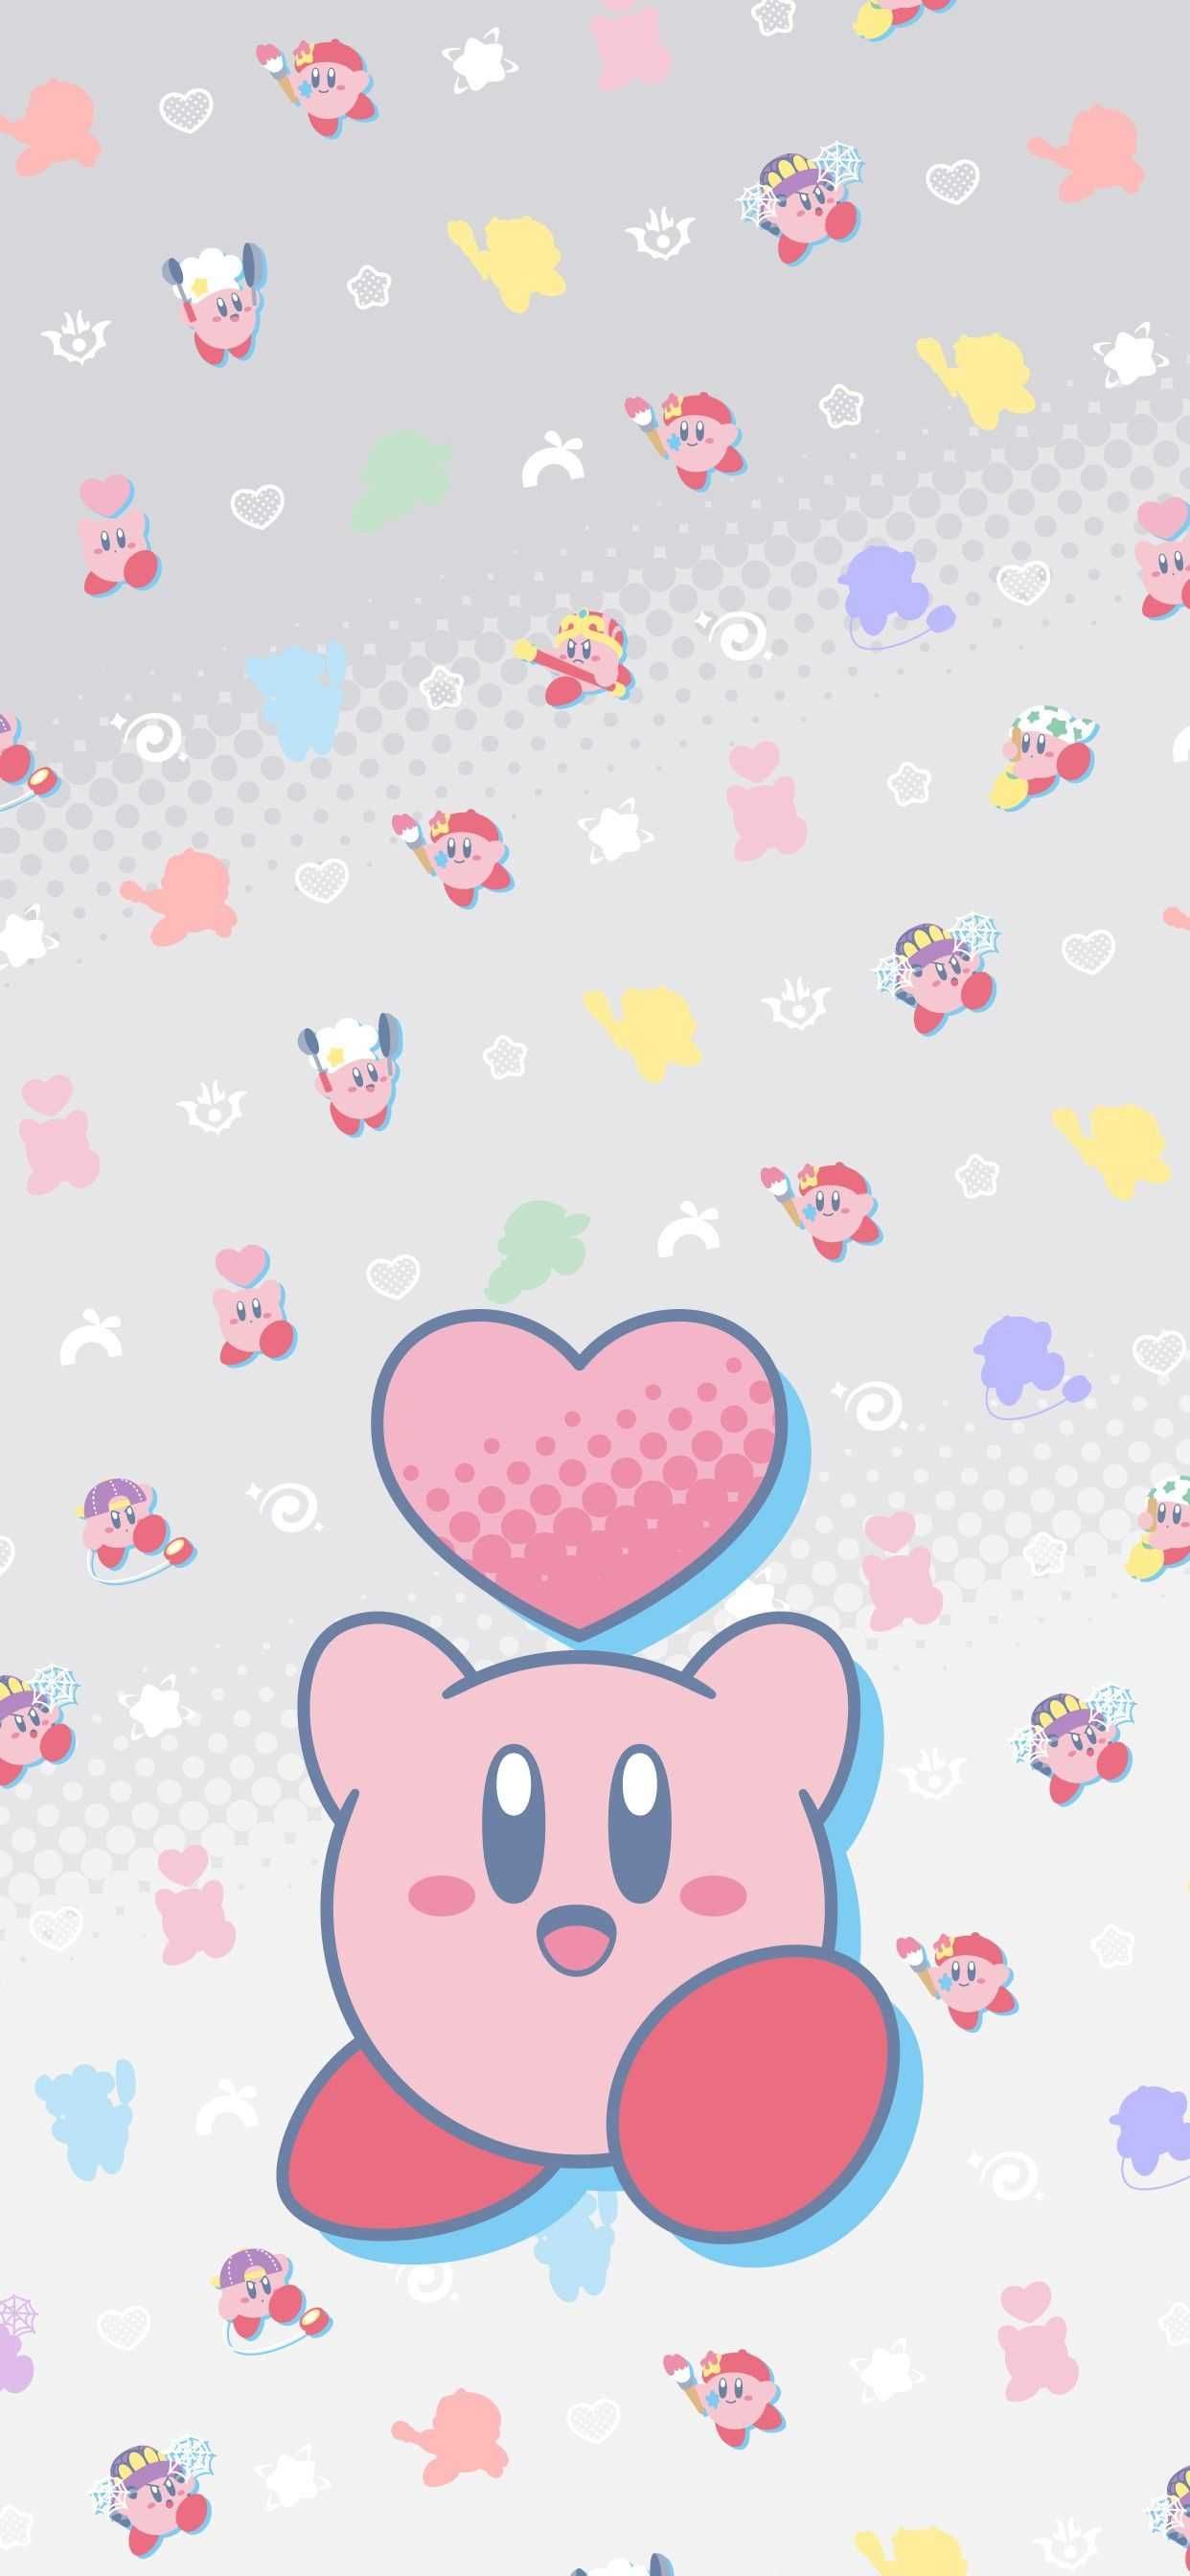 VIZ on Twitter Have some adorable Kirby wallpapers for your phone   httpstcolKUqYWOqul  Twitter